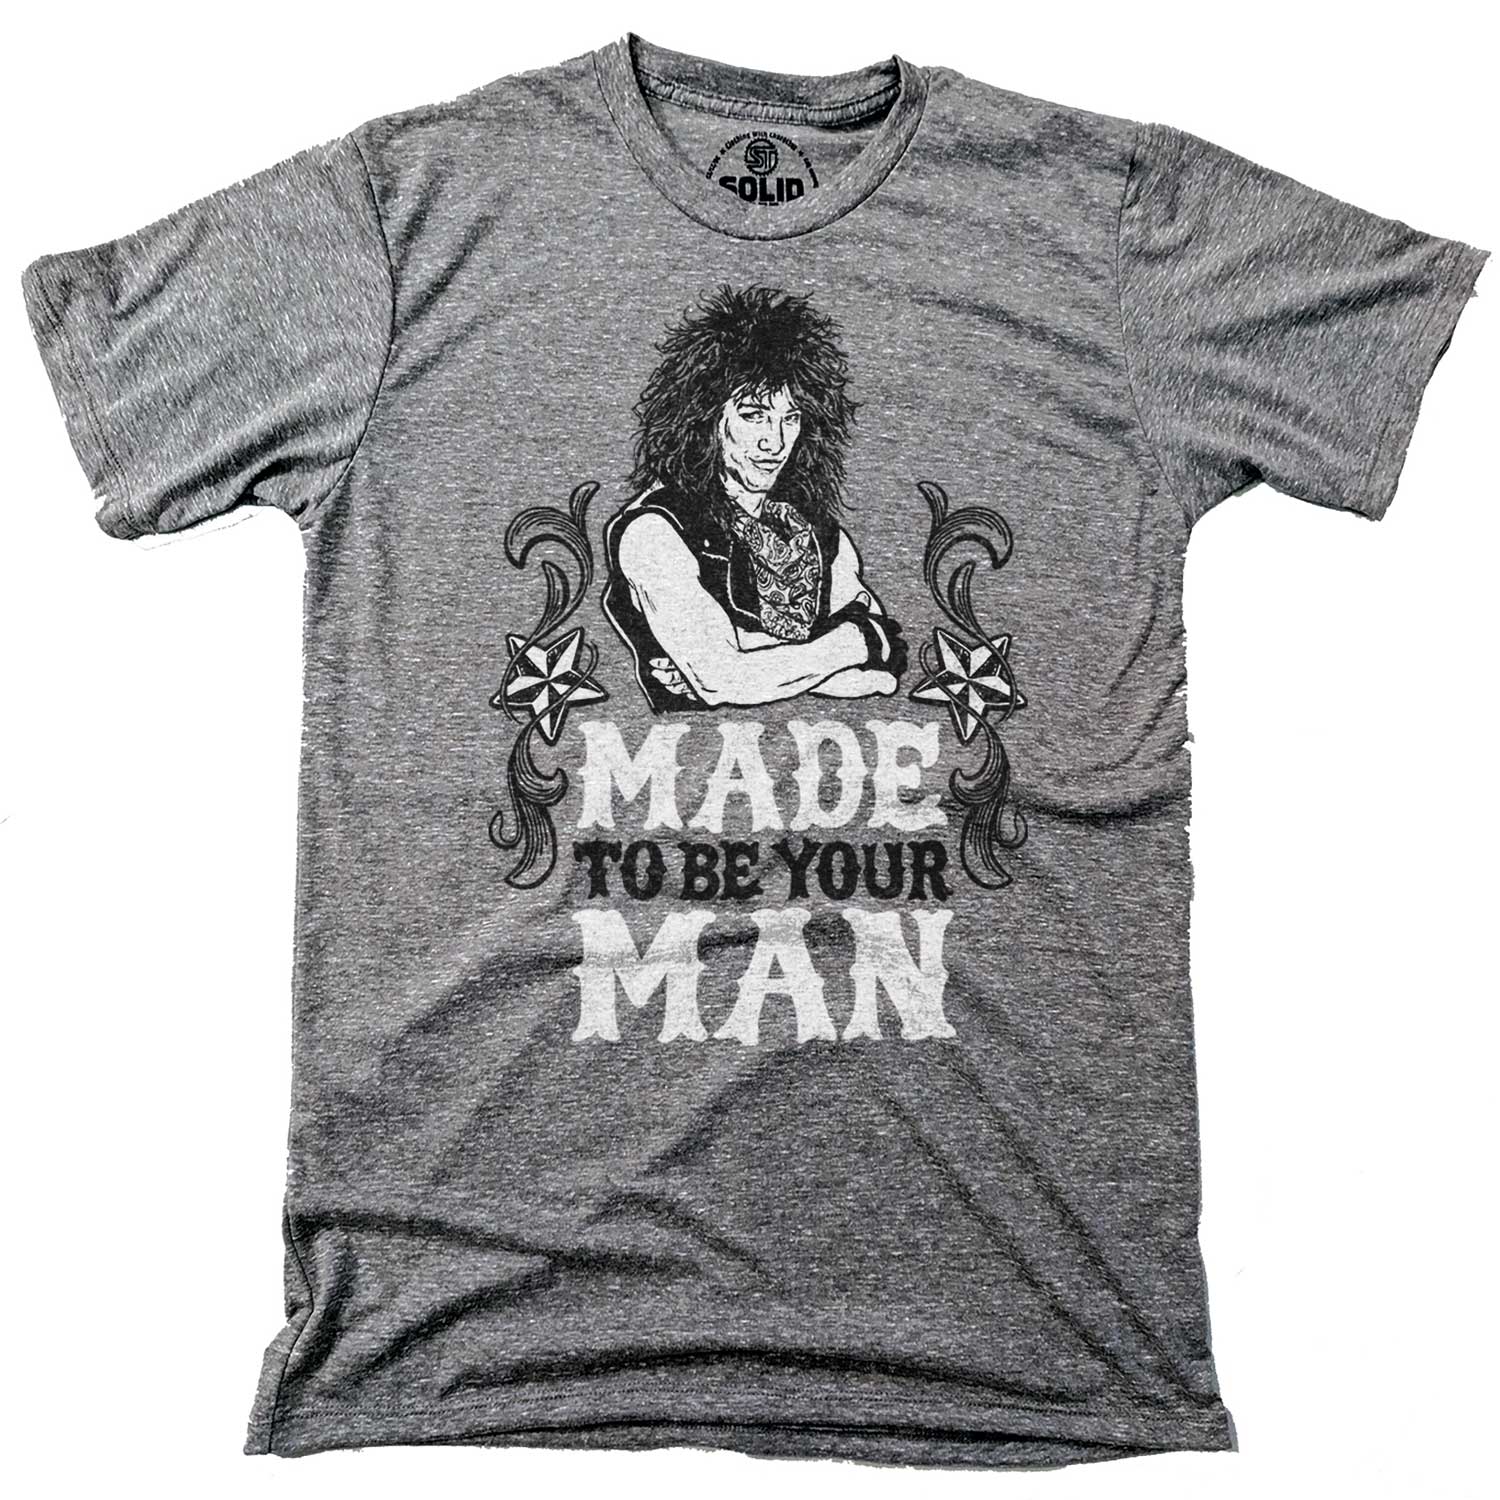 Men's Made To Be Your Man Vintage 80s Graphic Tee | Cool Bon Jovi T-shirt for Men | Solid Threads